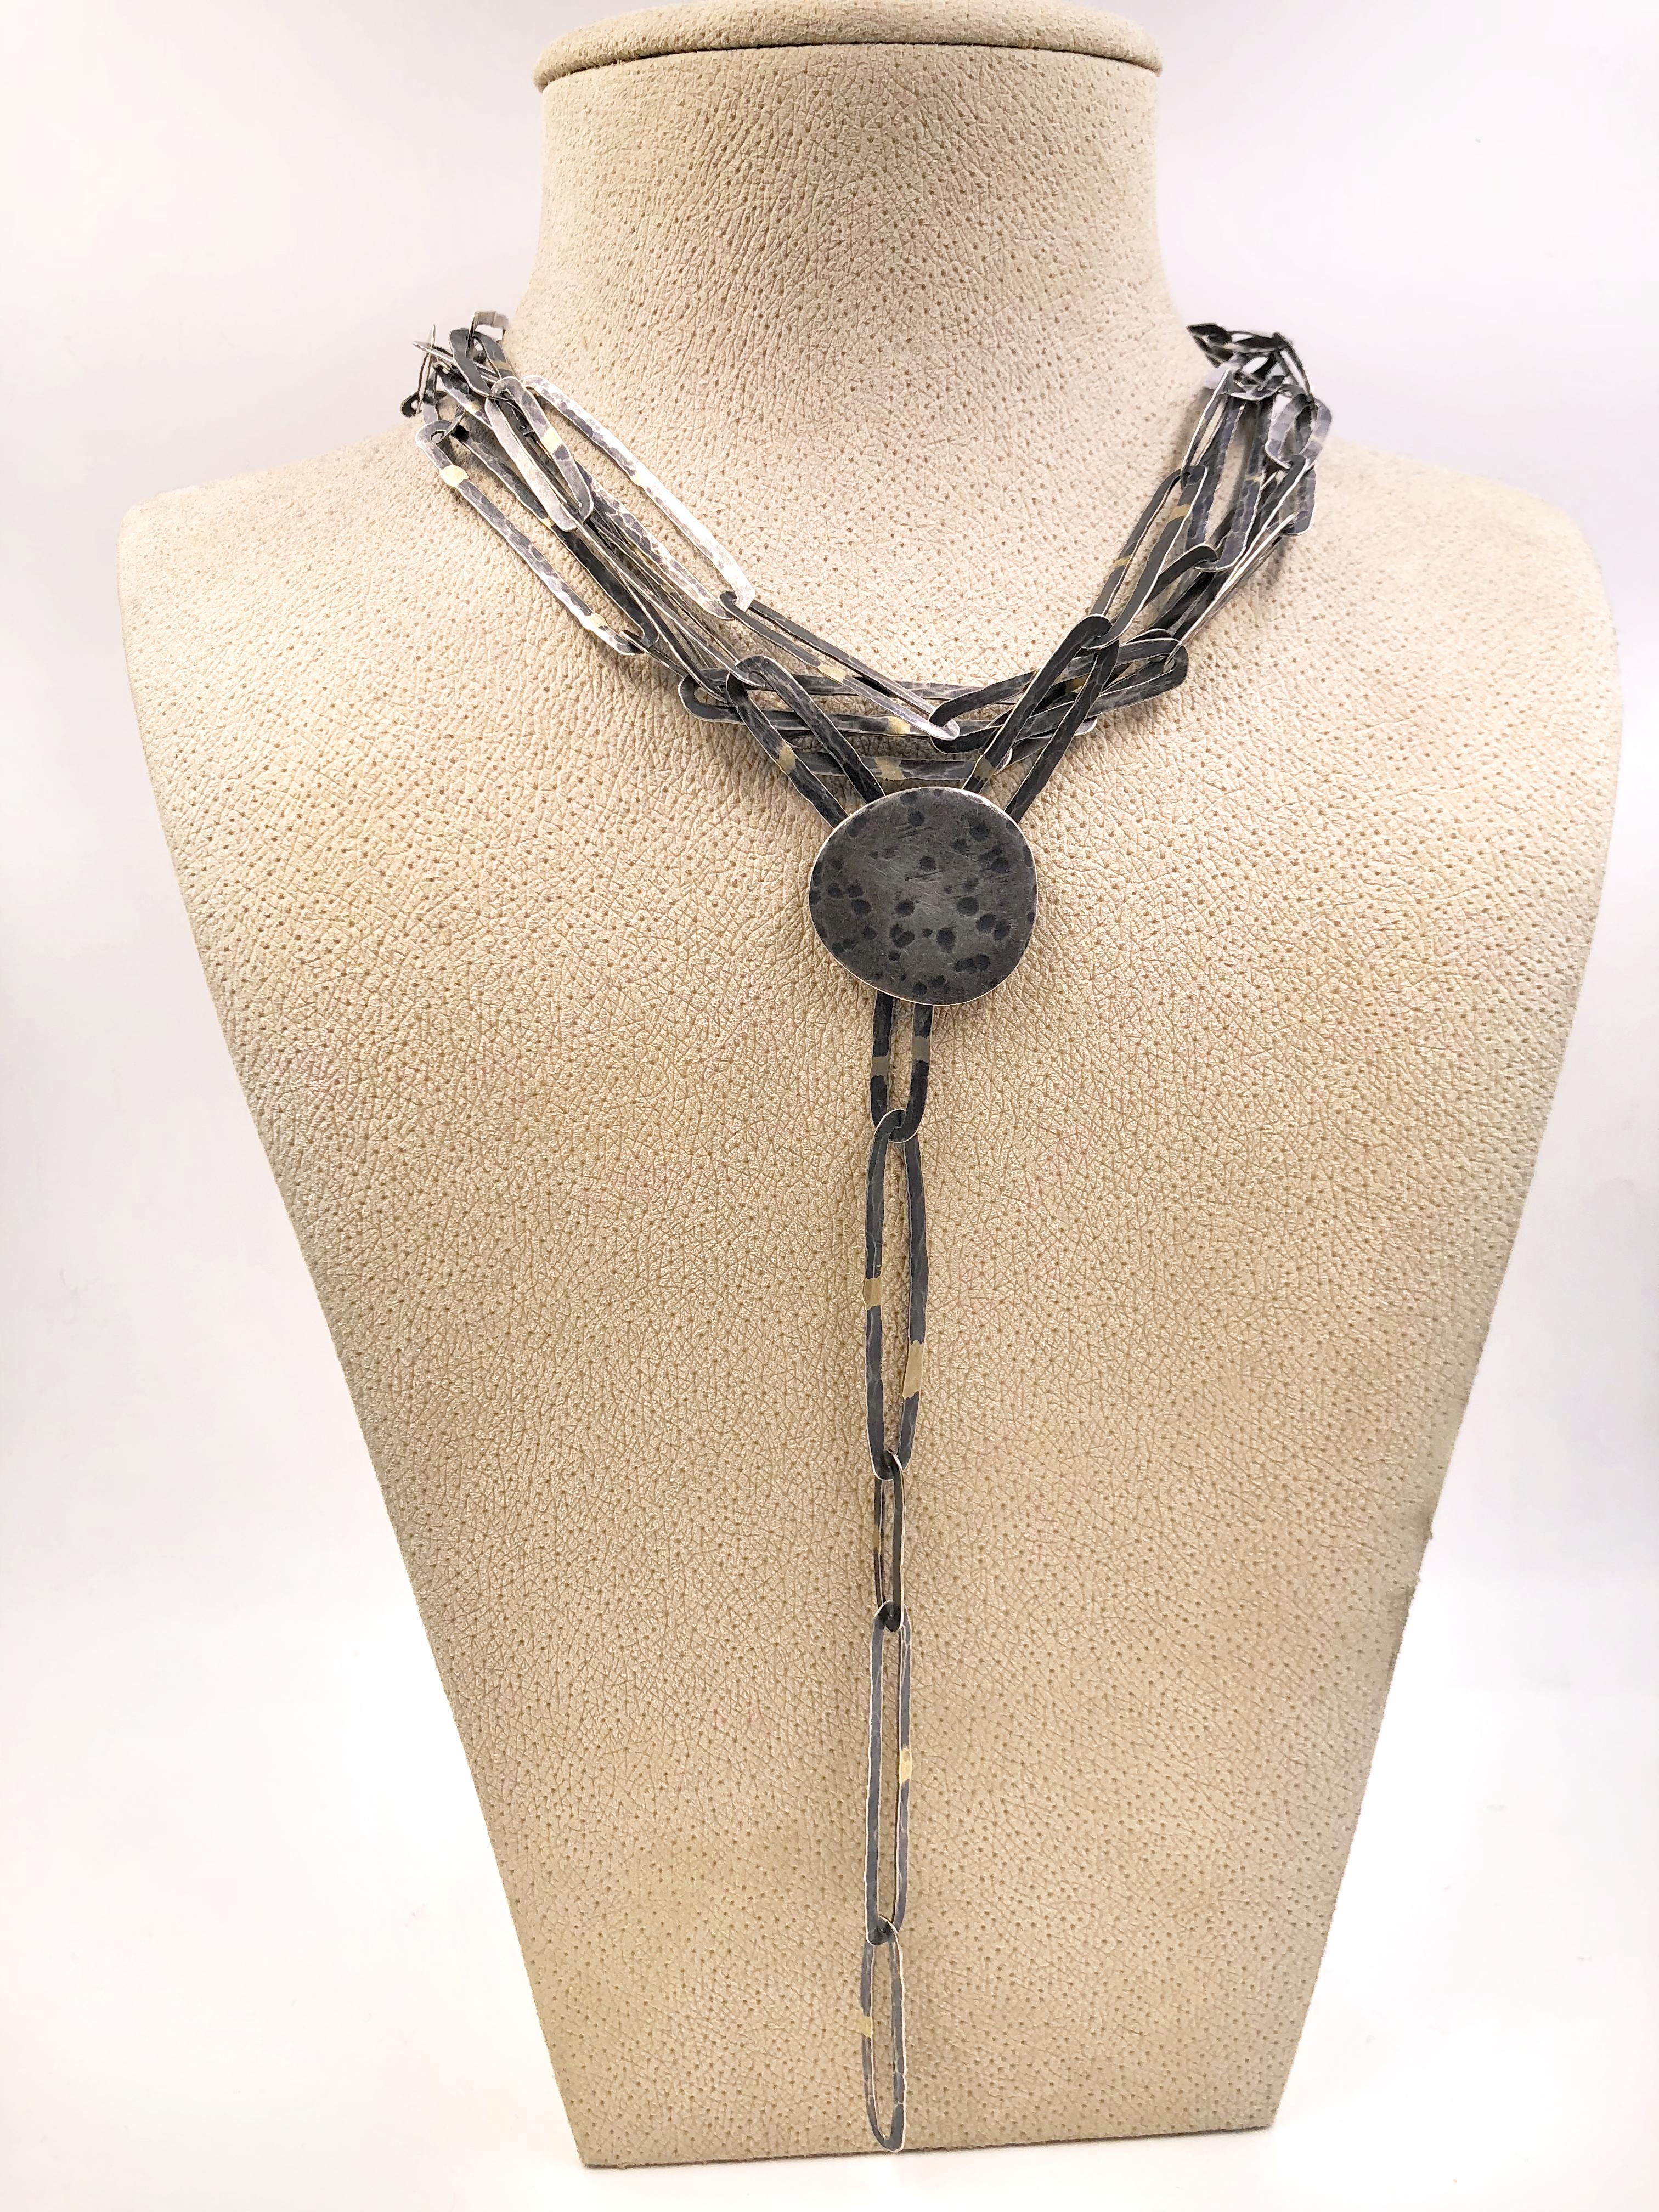 John Iversen Extra Long One of a Kind Oxidized Silver Gold Chain Link Necklace 1